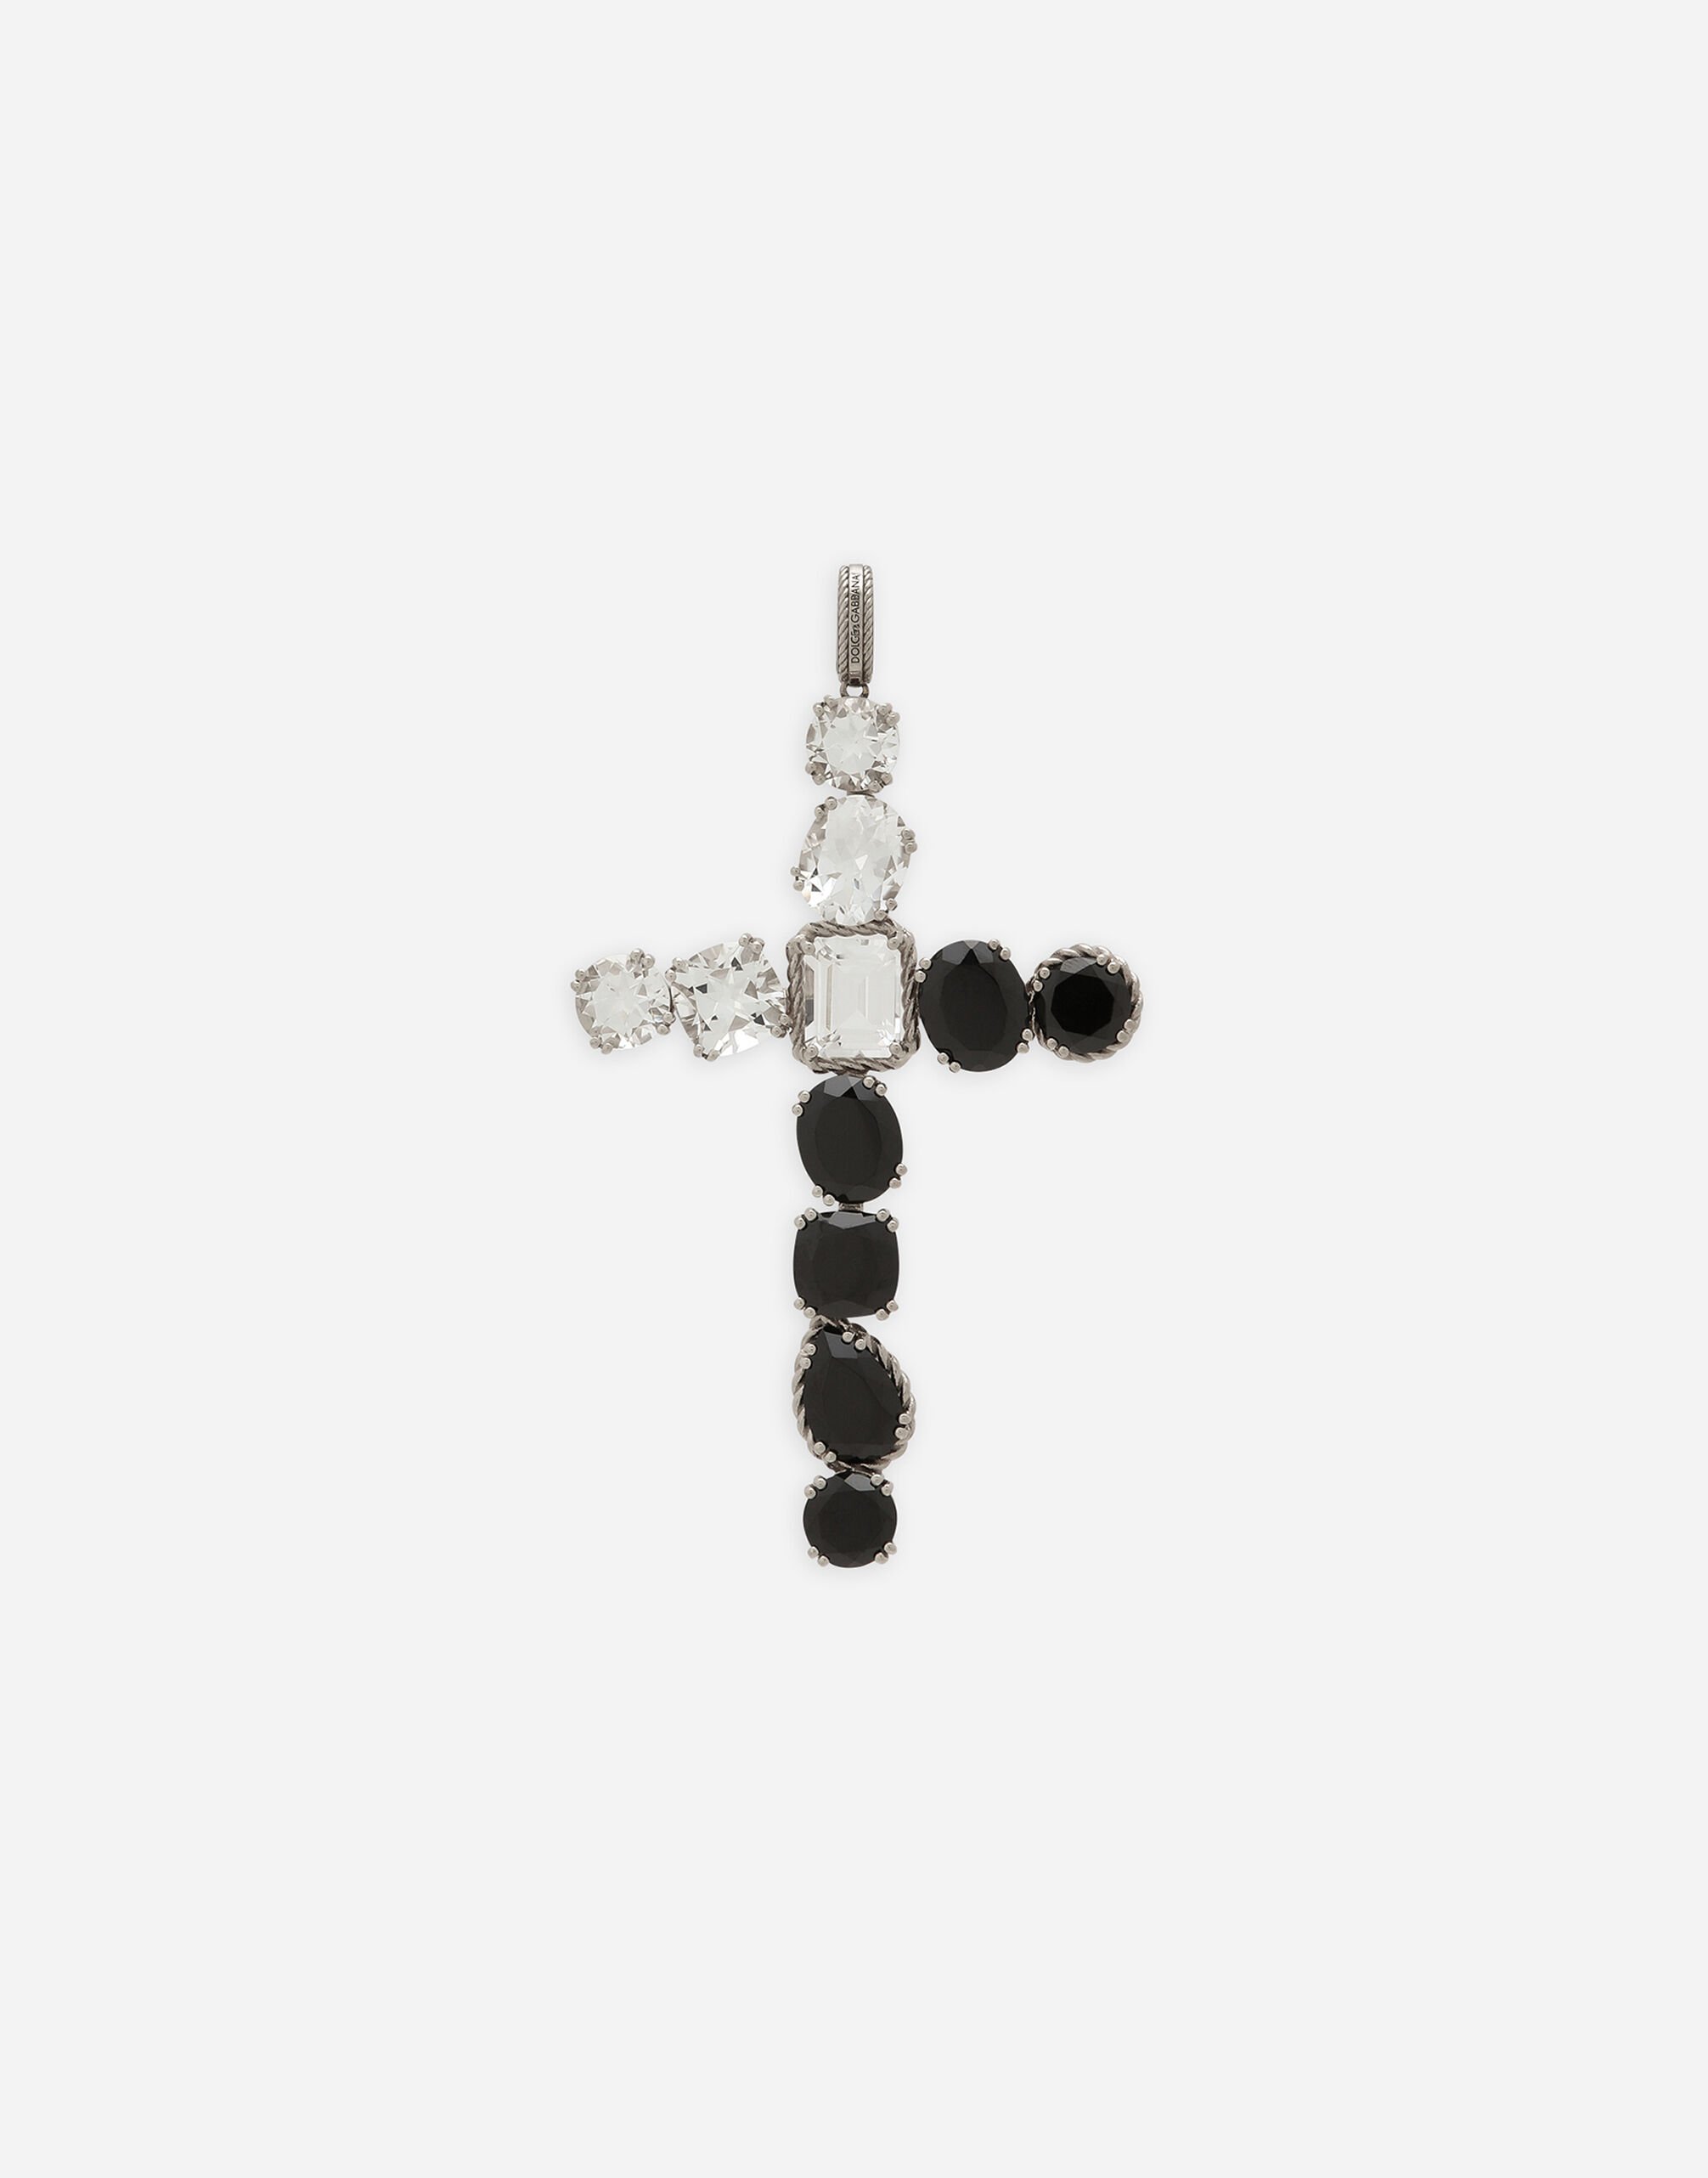 Dolce & Gabbana 18k white gold Anna charm with colorless topazes and black spinels White WAQA3GWTOLB